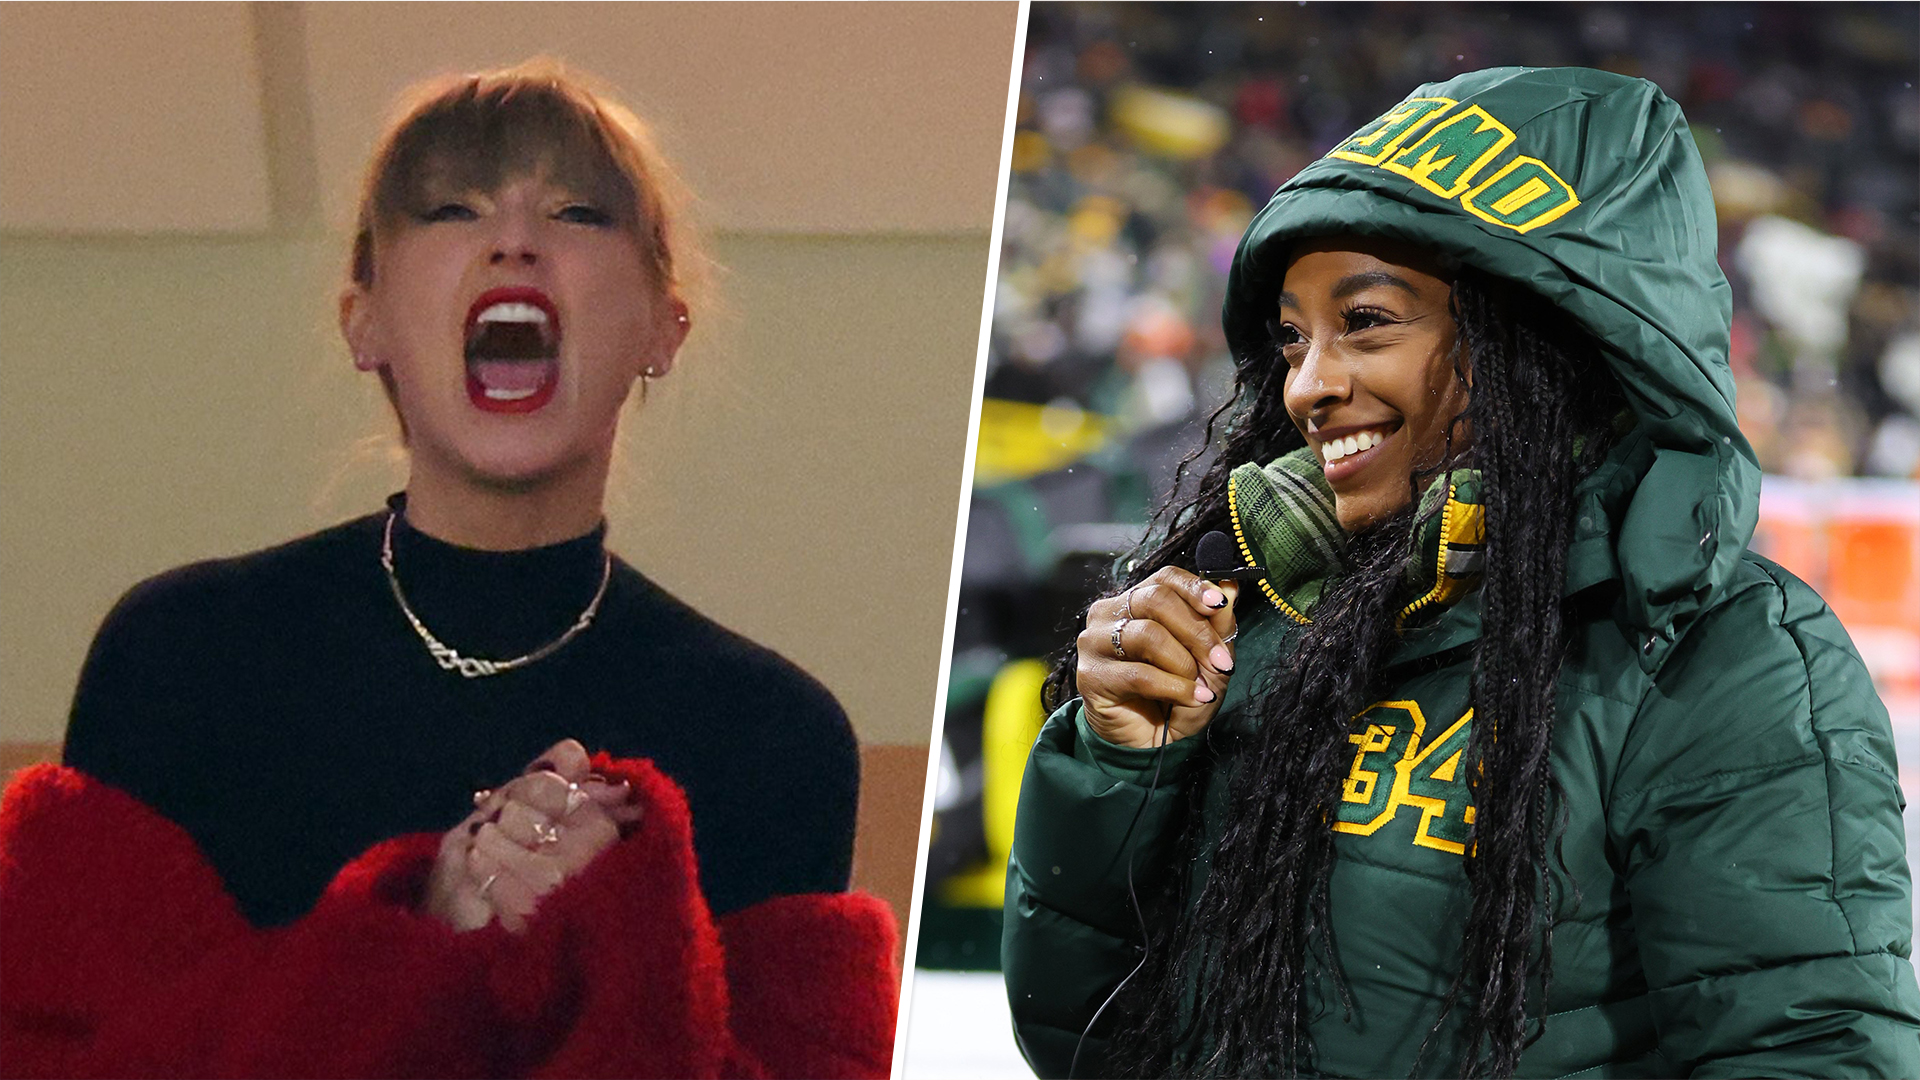 Taylor Swift and Simone Biles attend Chiefs-Packers game